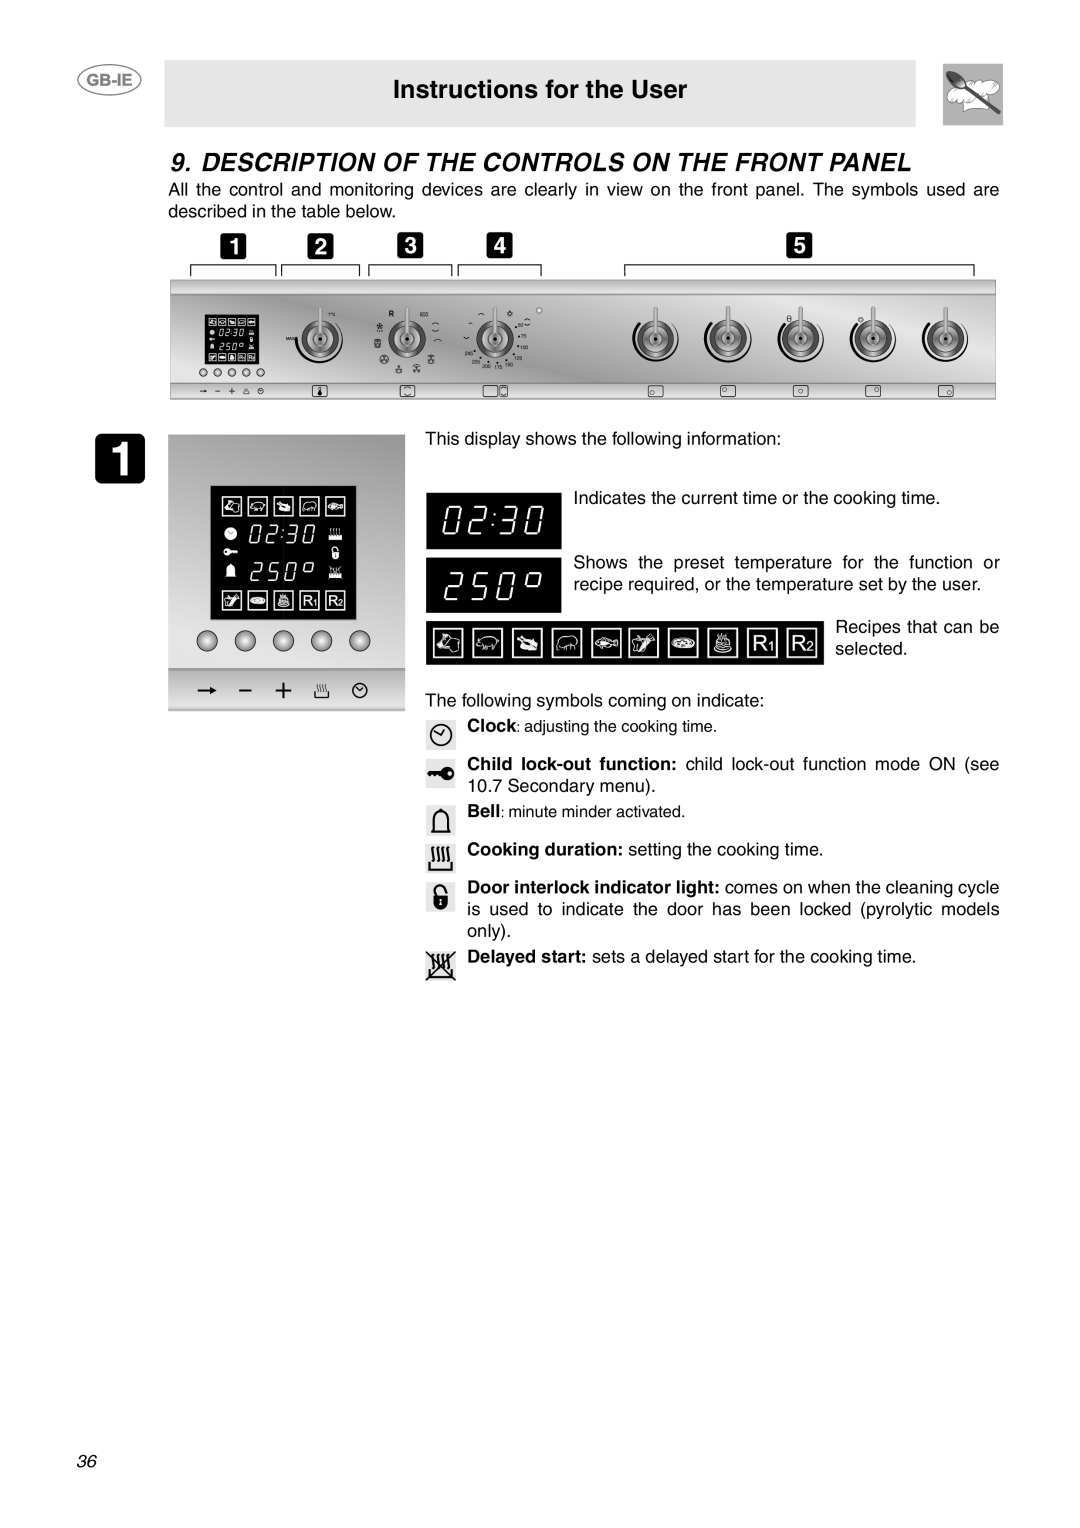 Smeg CE92CMX manual Description Of The Controls On The Front Panel, Instructions for the User 